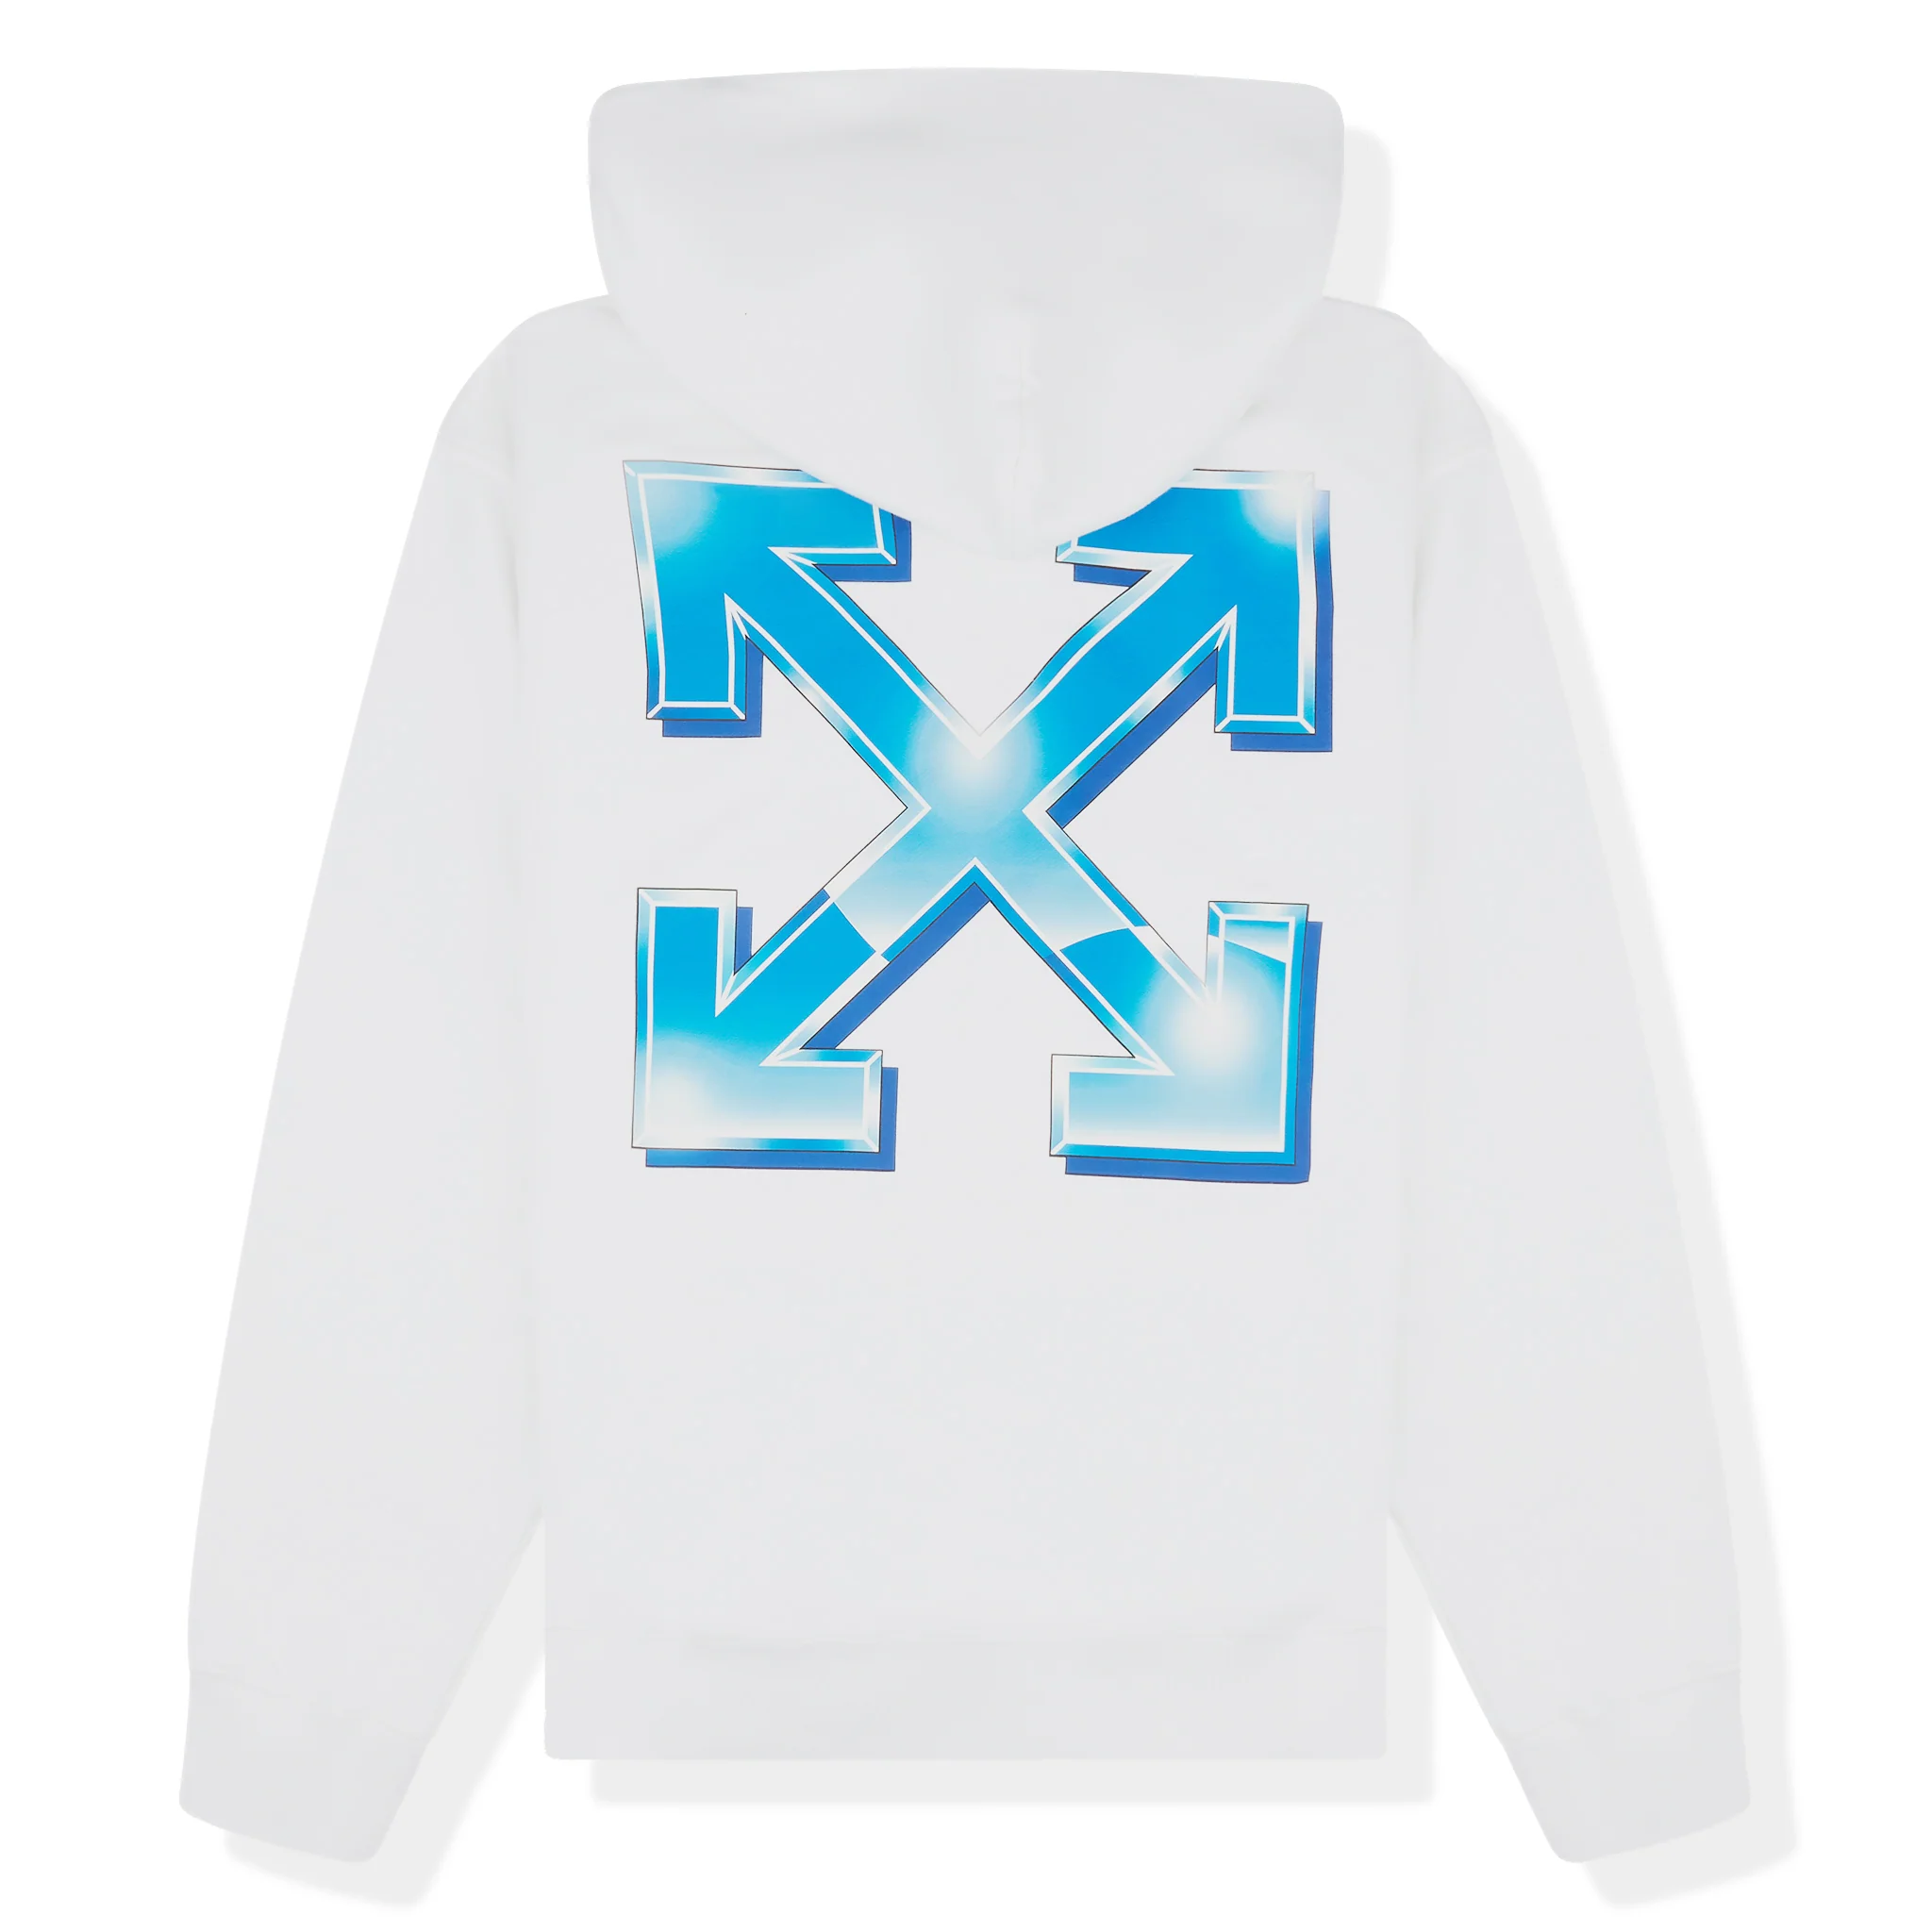 The Iconic Off-White Hoodie: A Fashion Statement That Transcends Trends